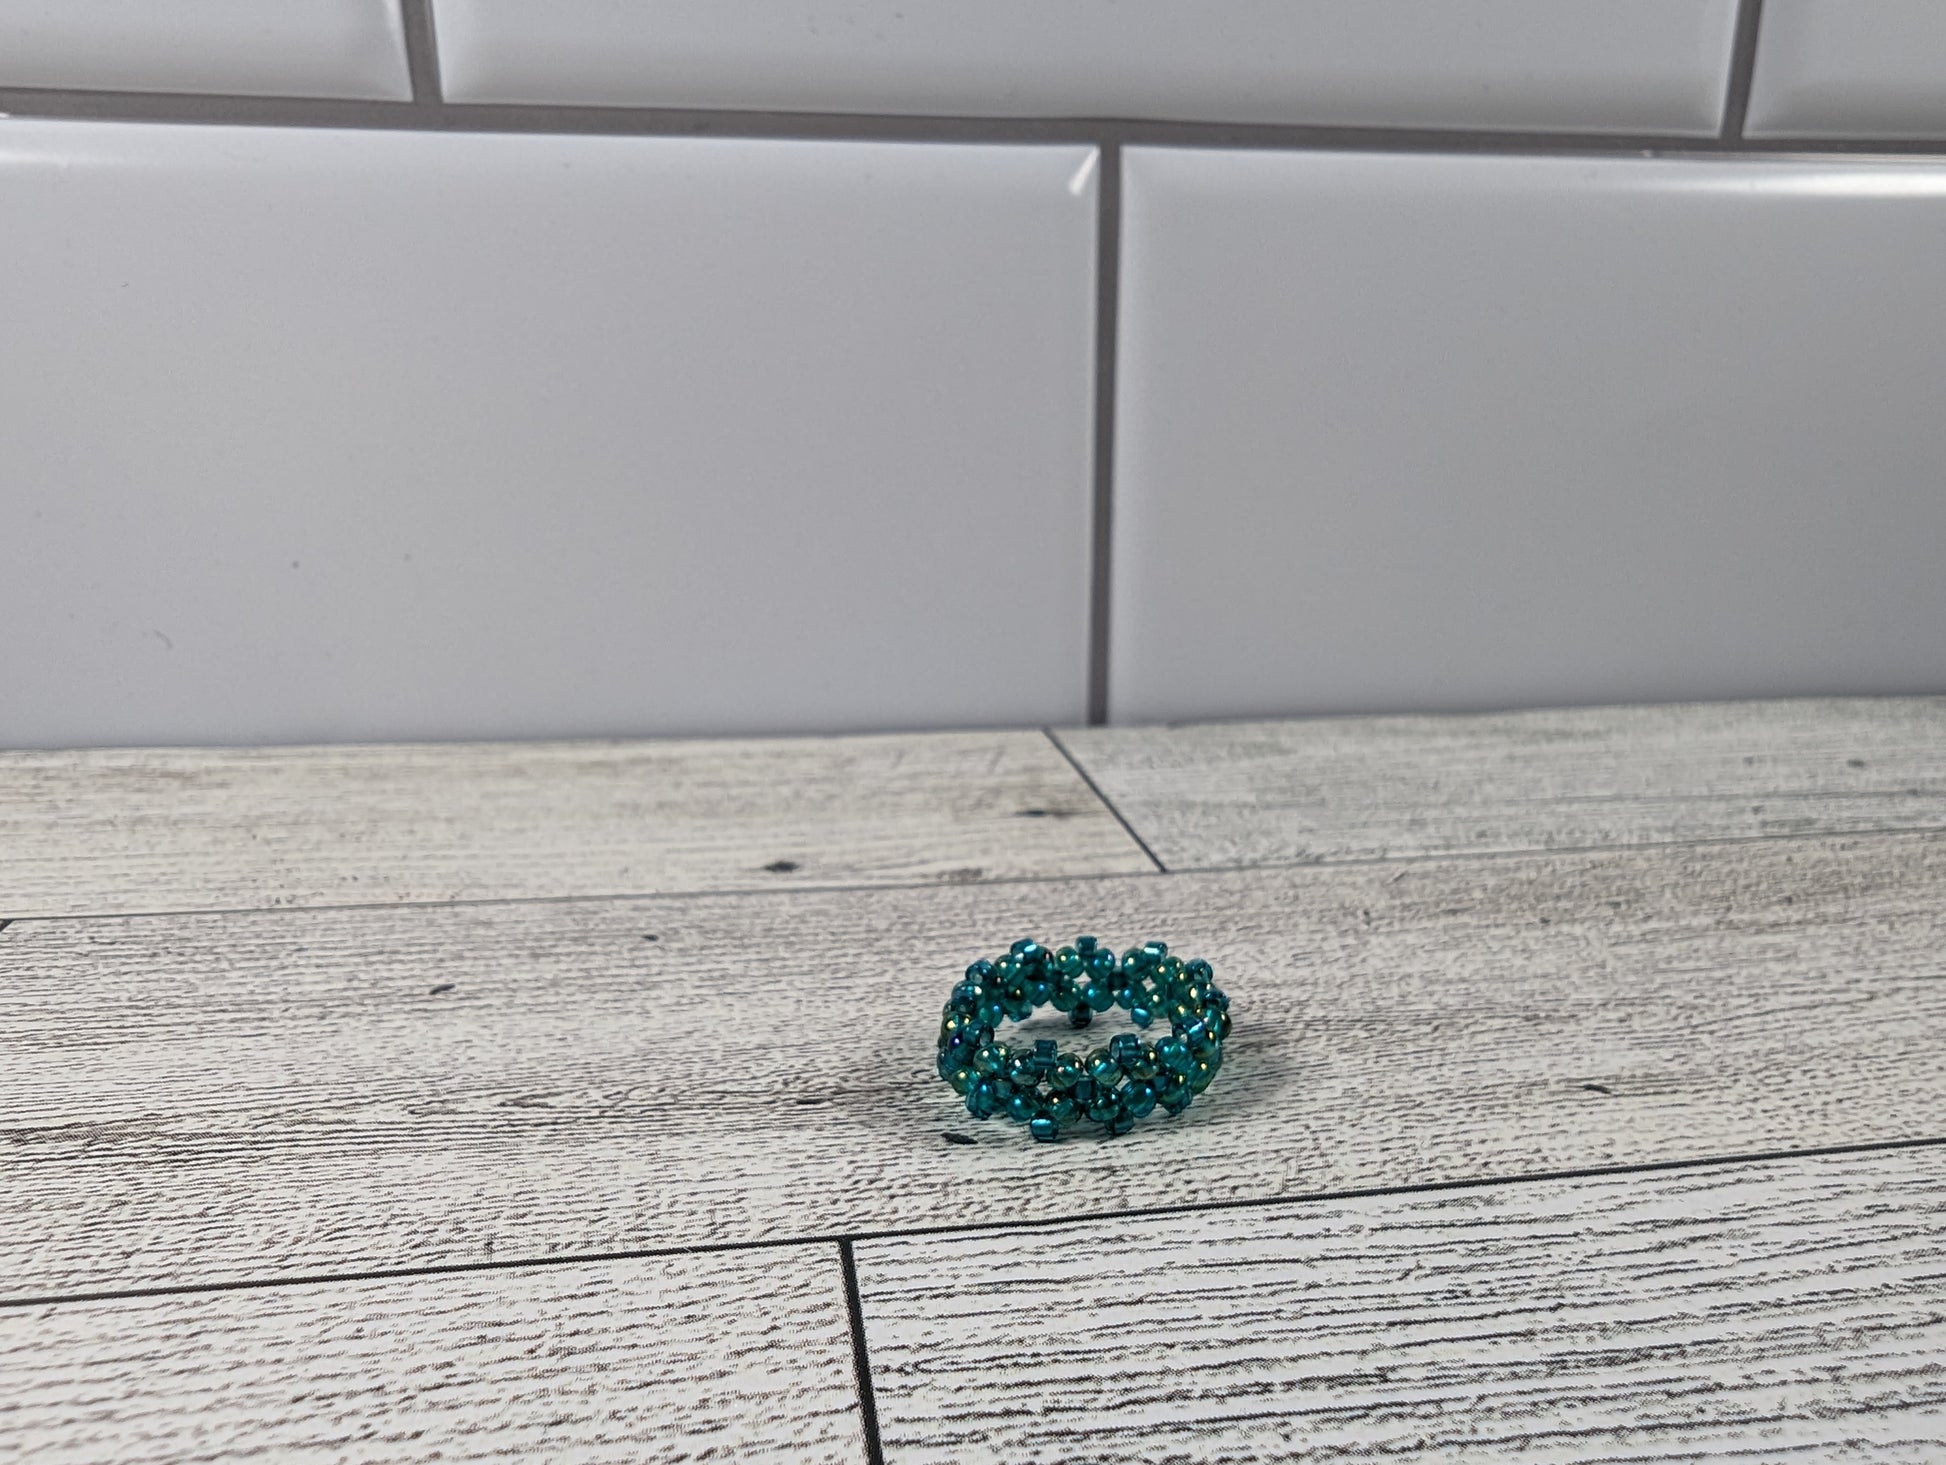 A green ring placed on a wood grain surface with a tile backdrop.